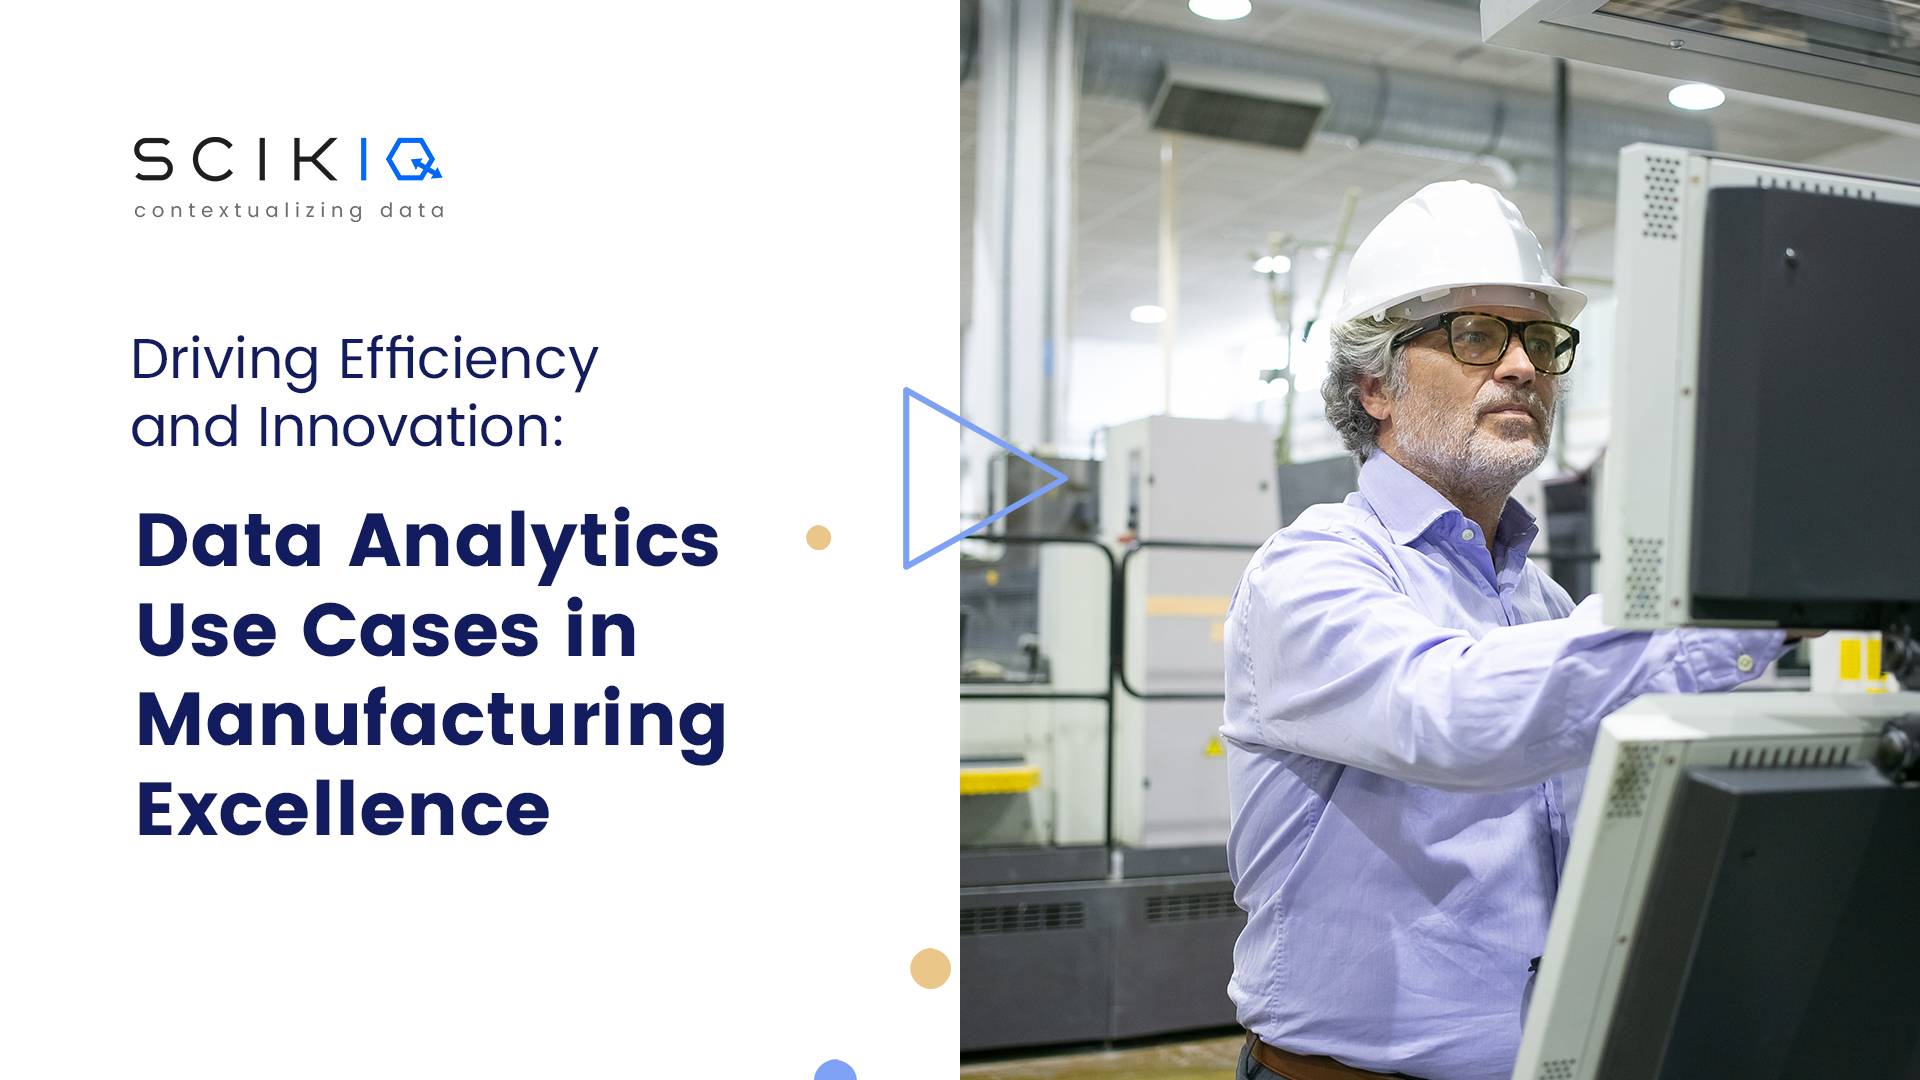 Driving Efficiency: Data Analytics Use Cases in Manufacturing Excellence